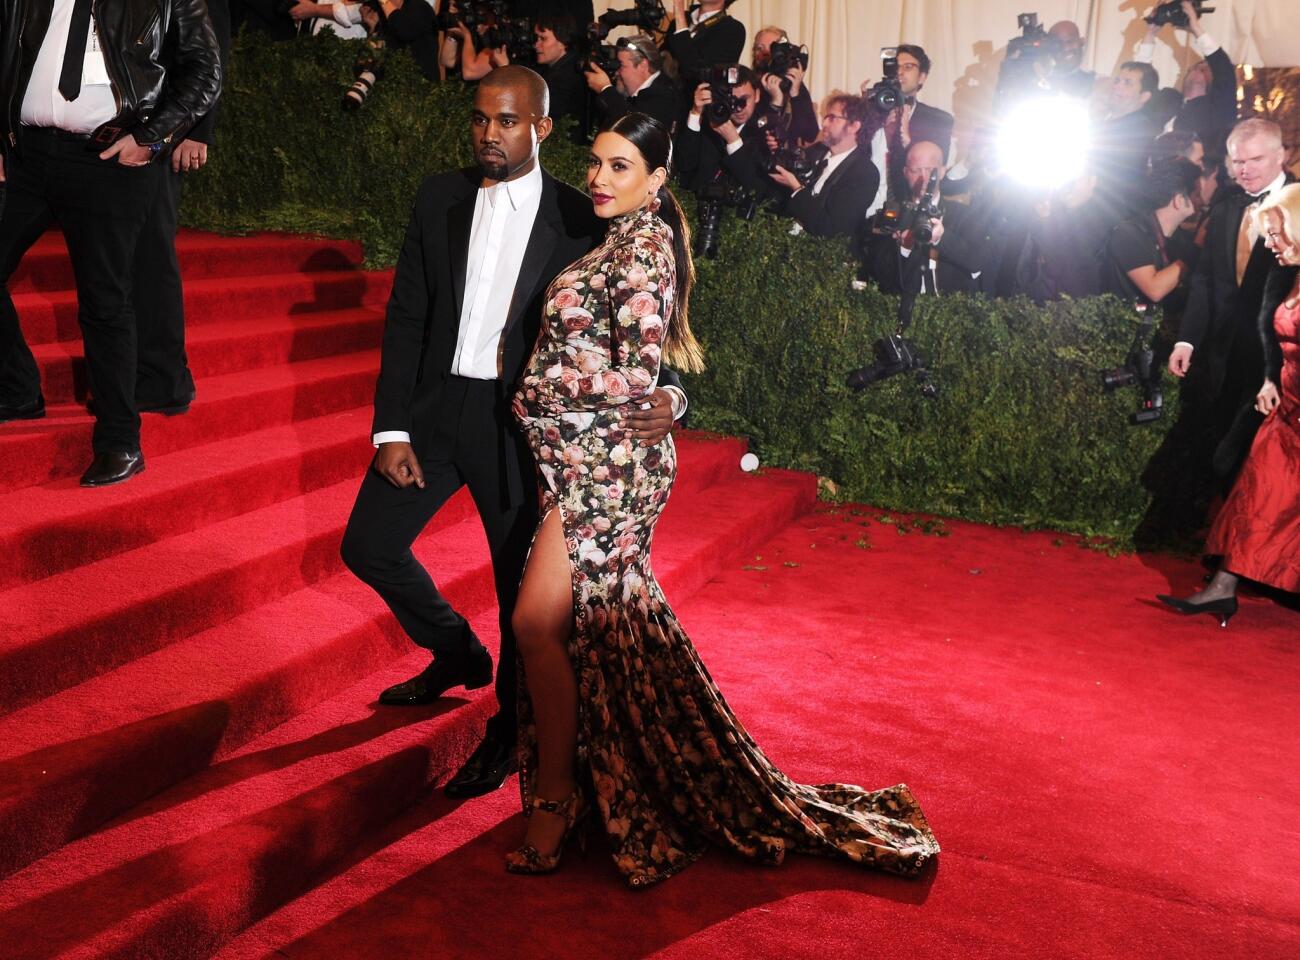 "Yeezus" rapper Kanye West and reality TV star Kim Kardashian attend the Costume Institute Gala for the "PUNK: Chaos to Couture" exhibition at the Metropolitan Museum of Art on May 6, 2013.